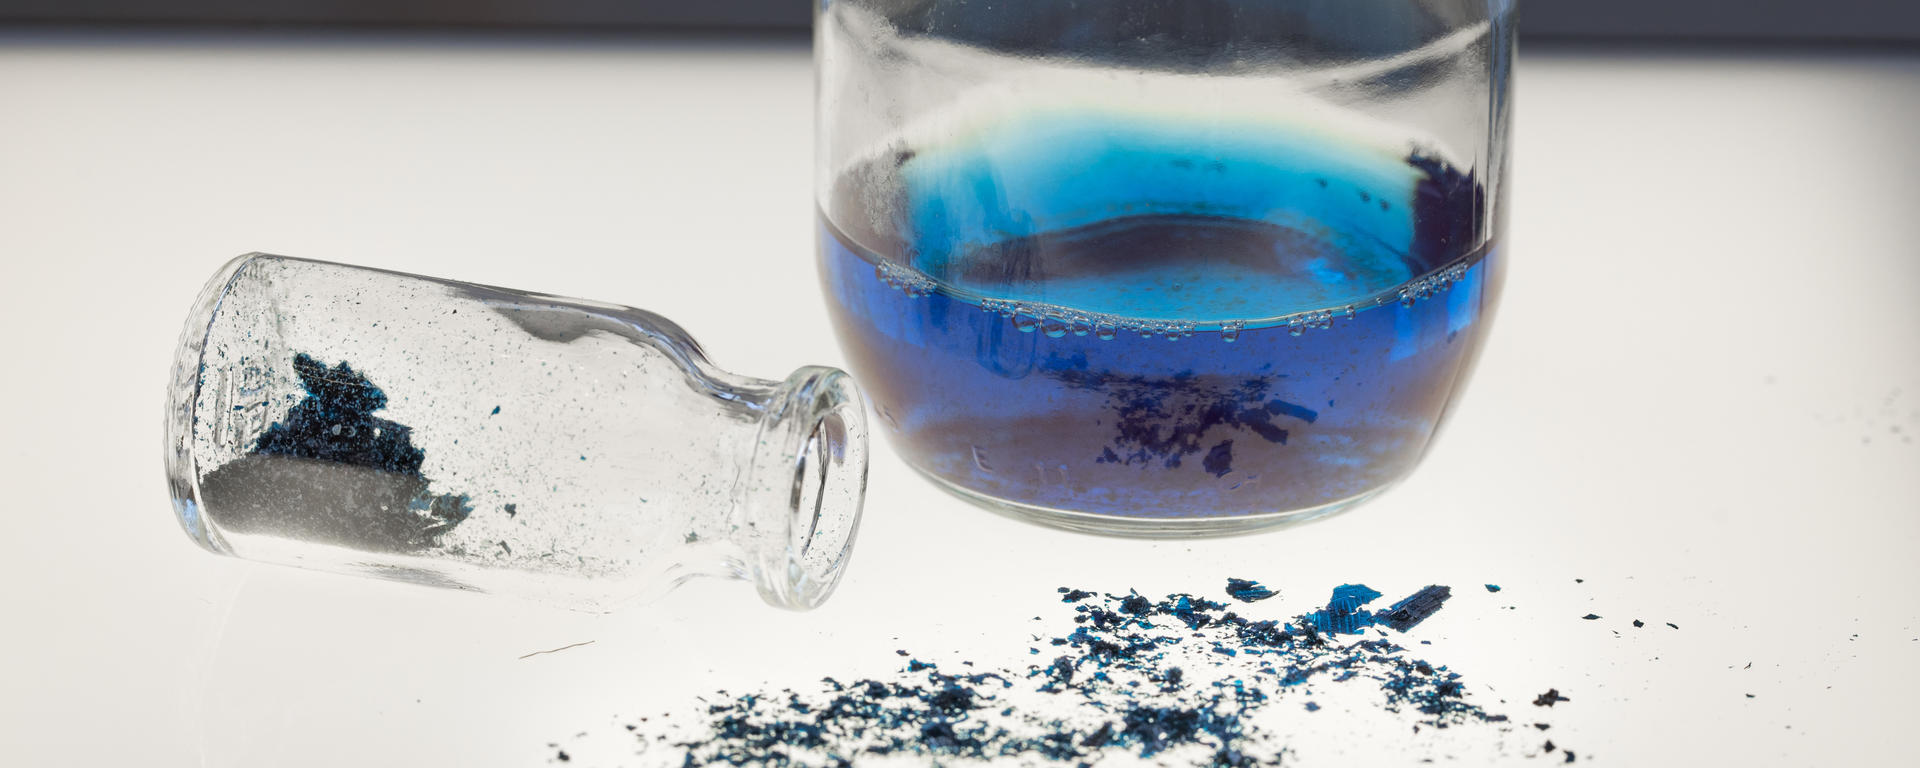 Phycocyanin, a natural source of blue dye, produced by Synergia Biotech's patented extraction process